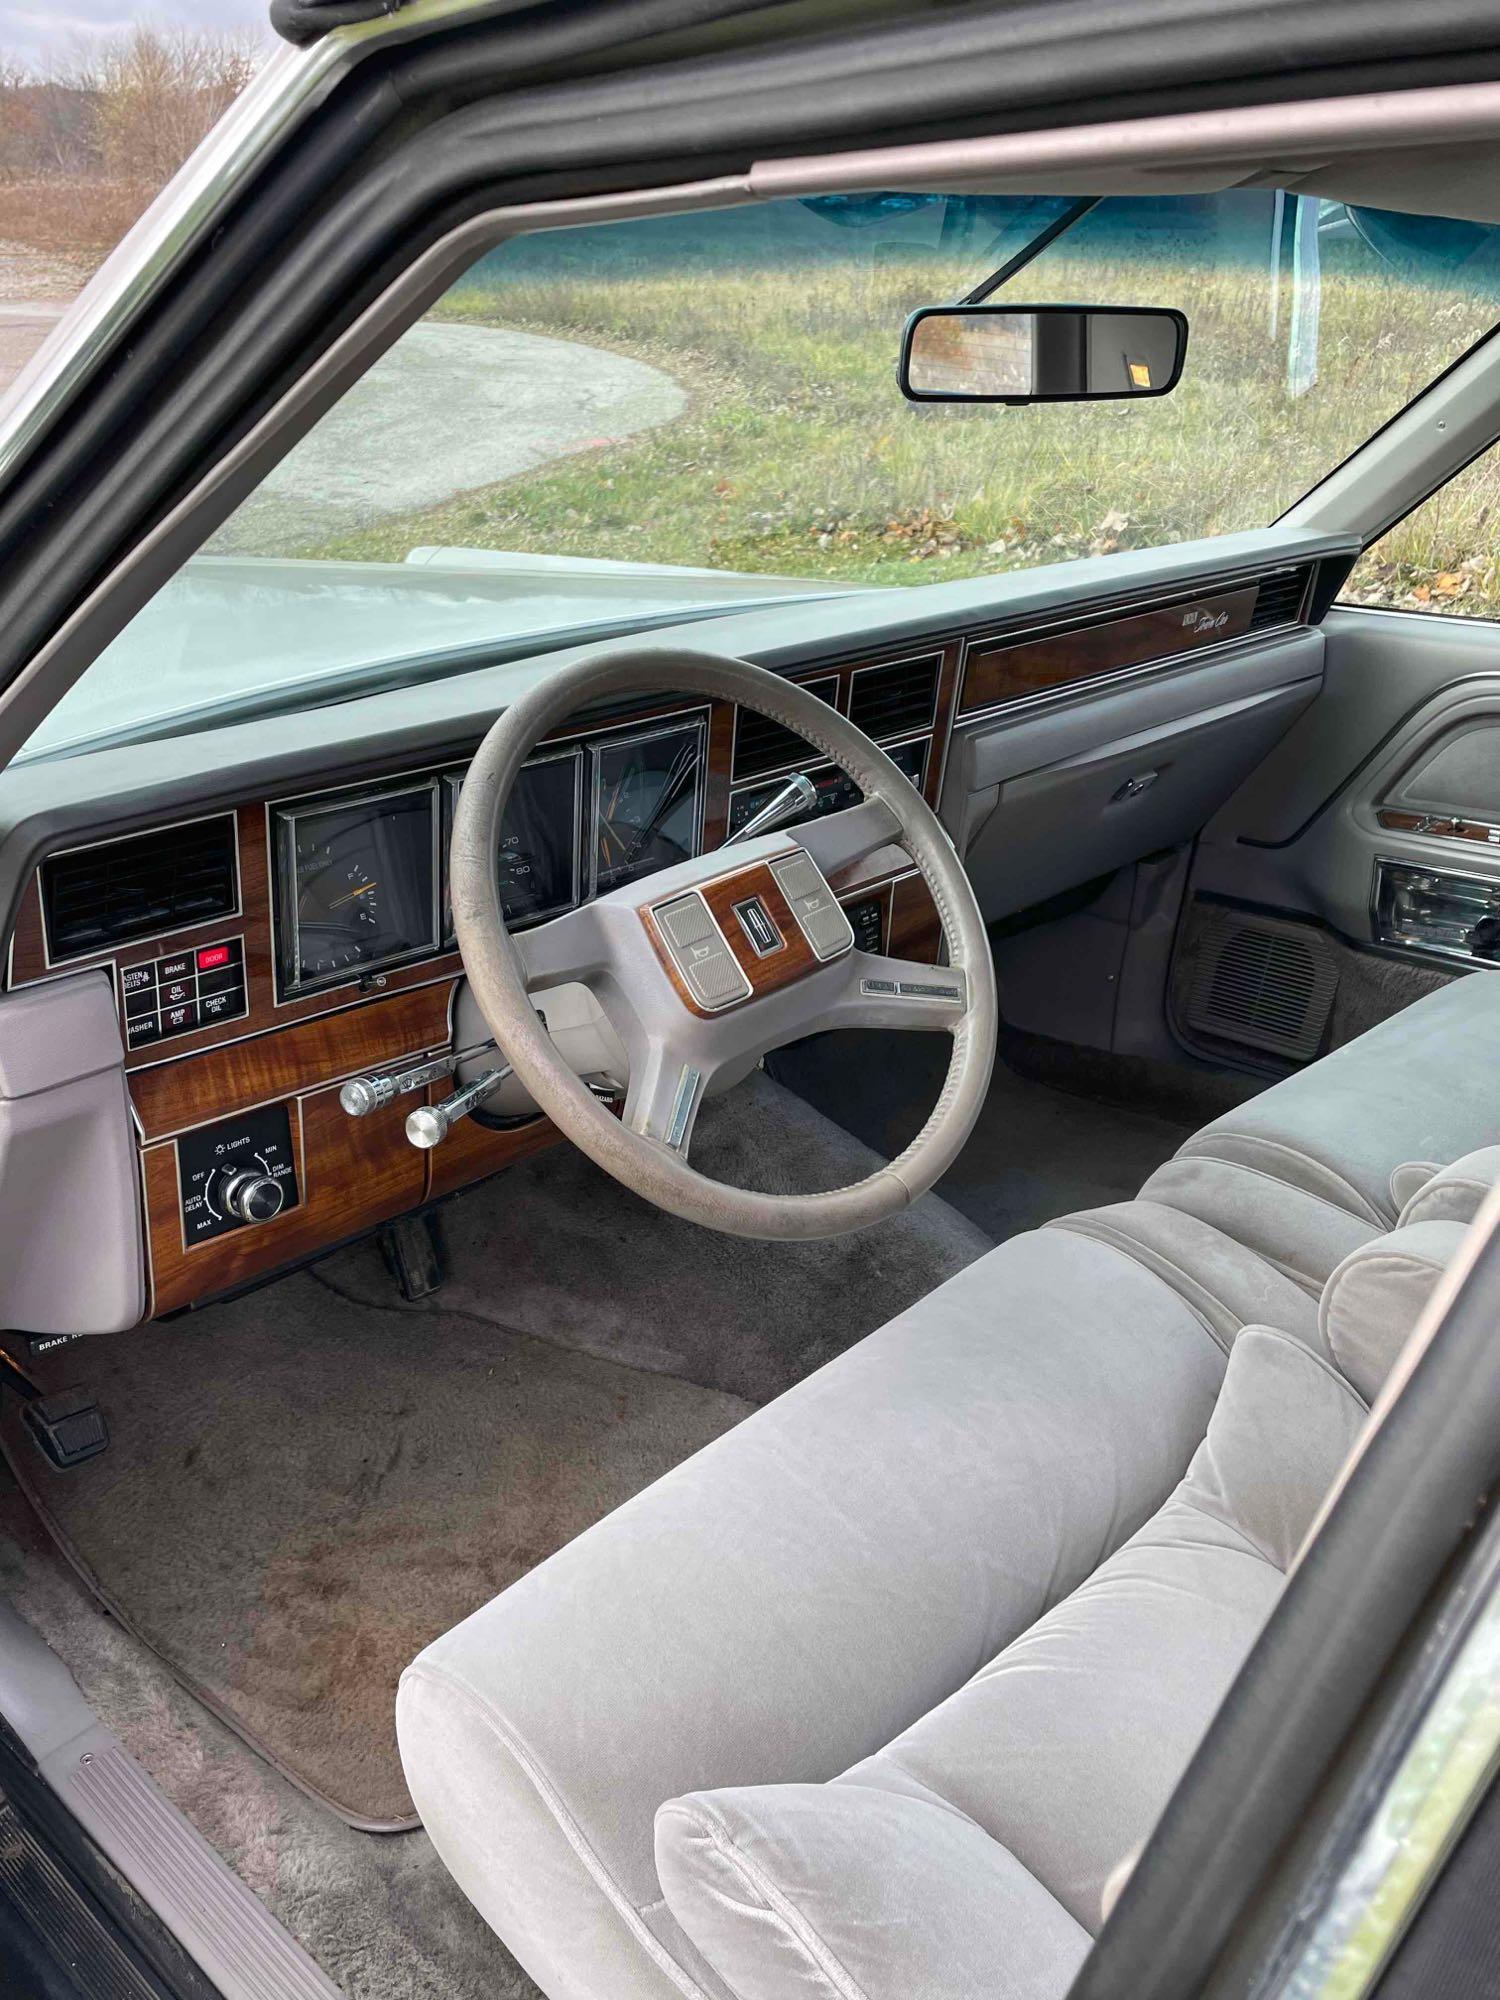 1989 Lincoln town car only 80K runs great CLASSIC!!!